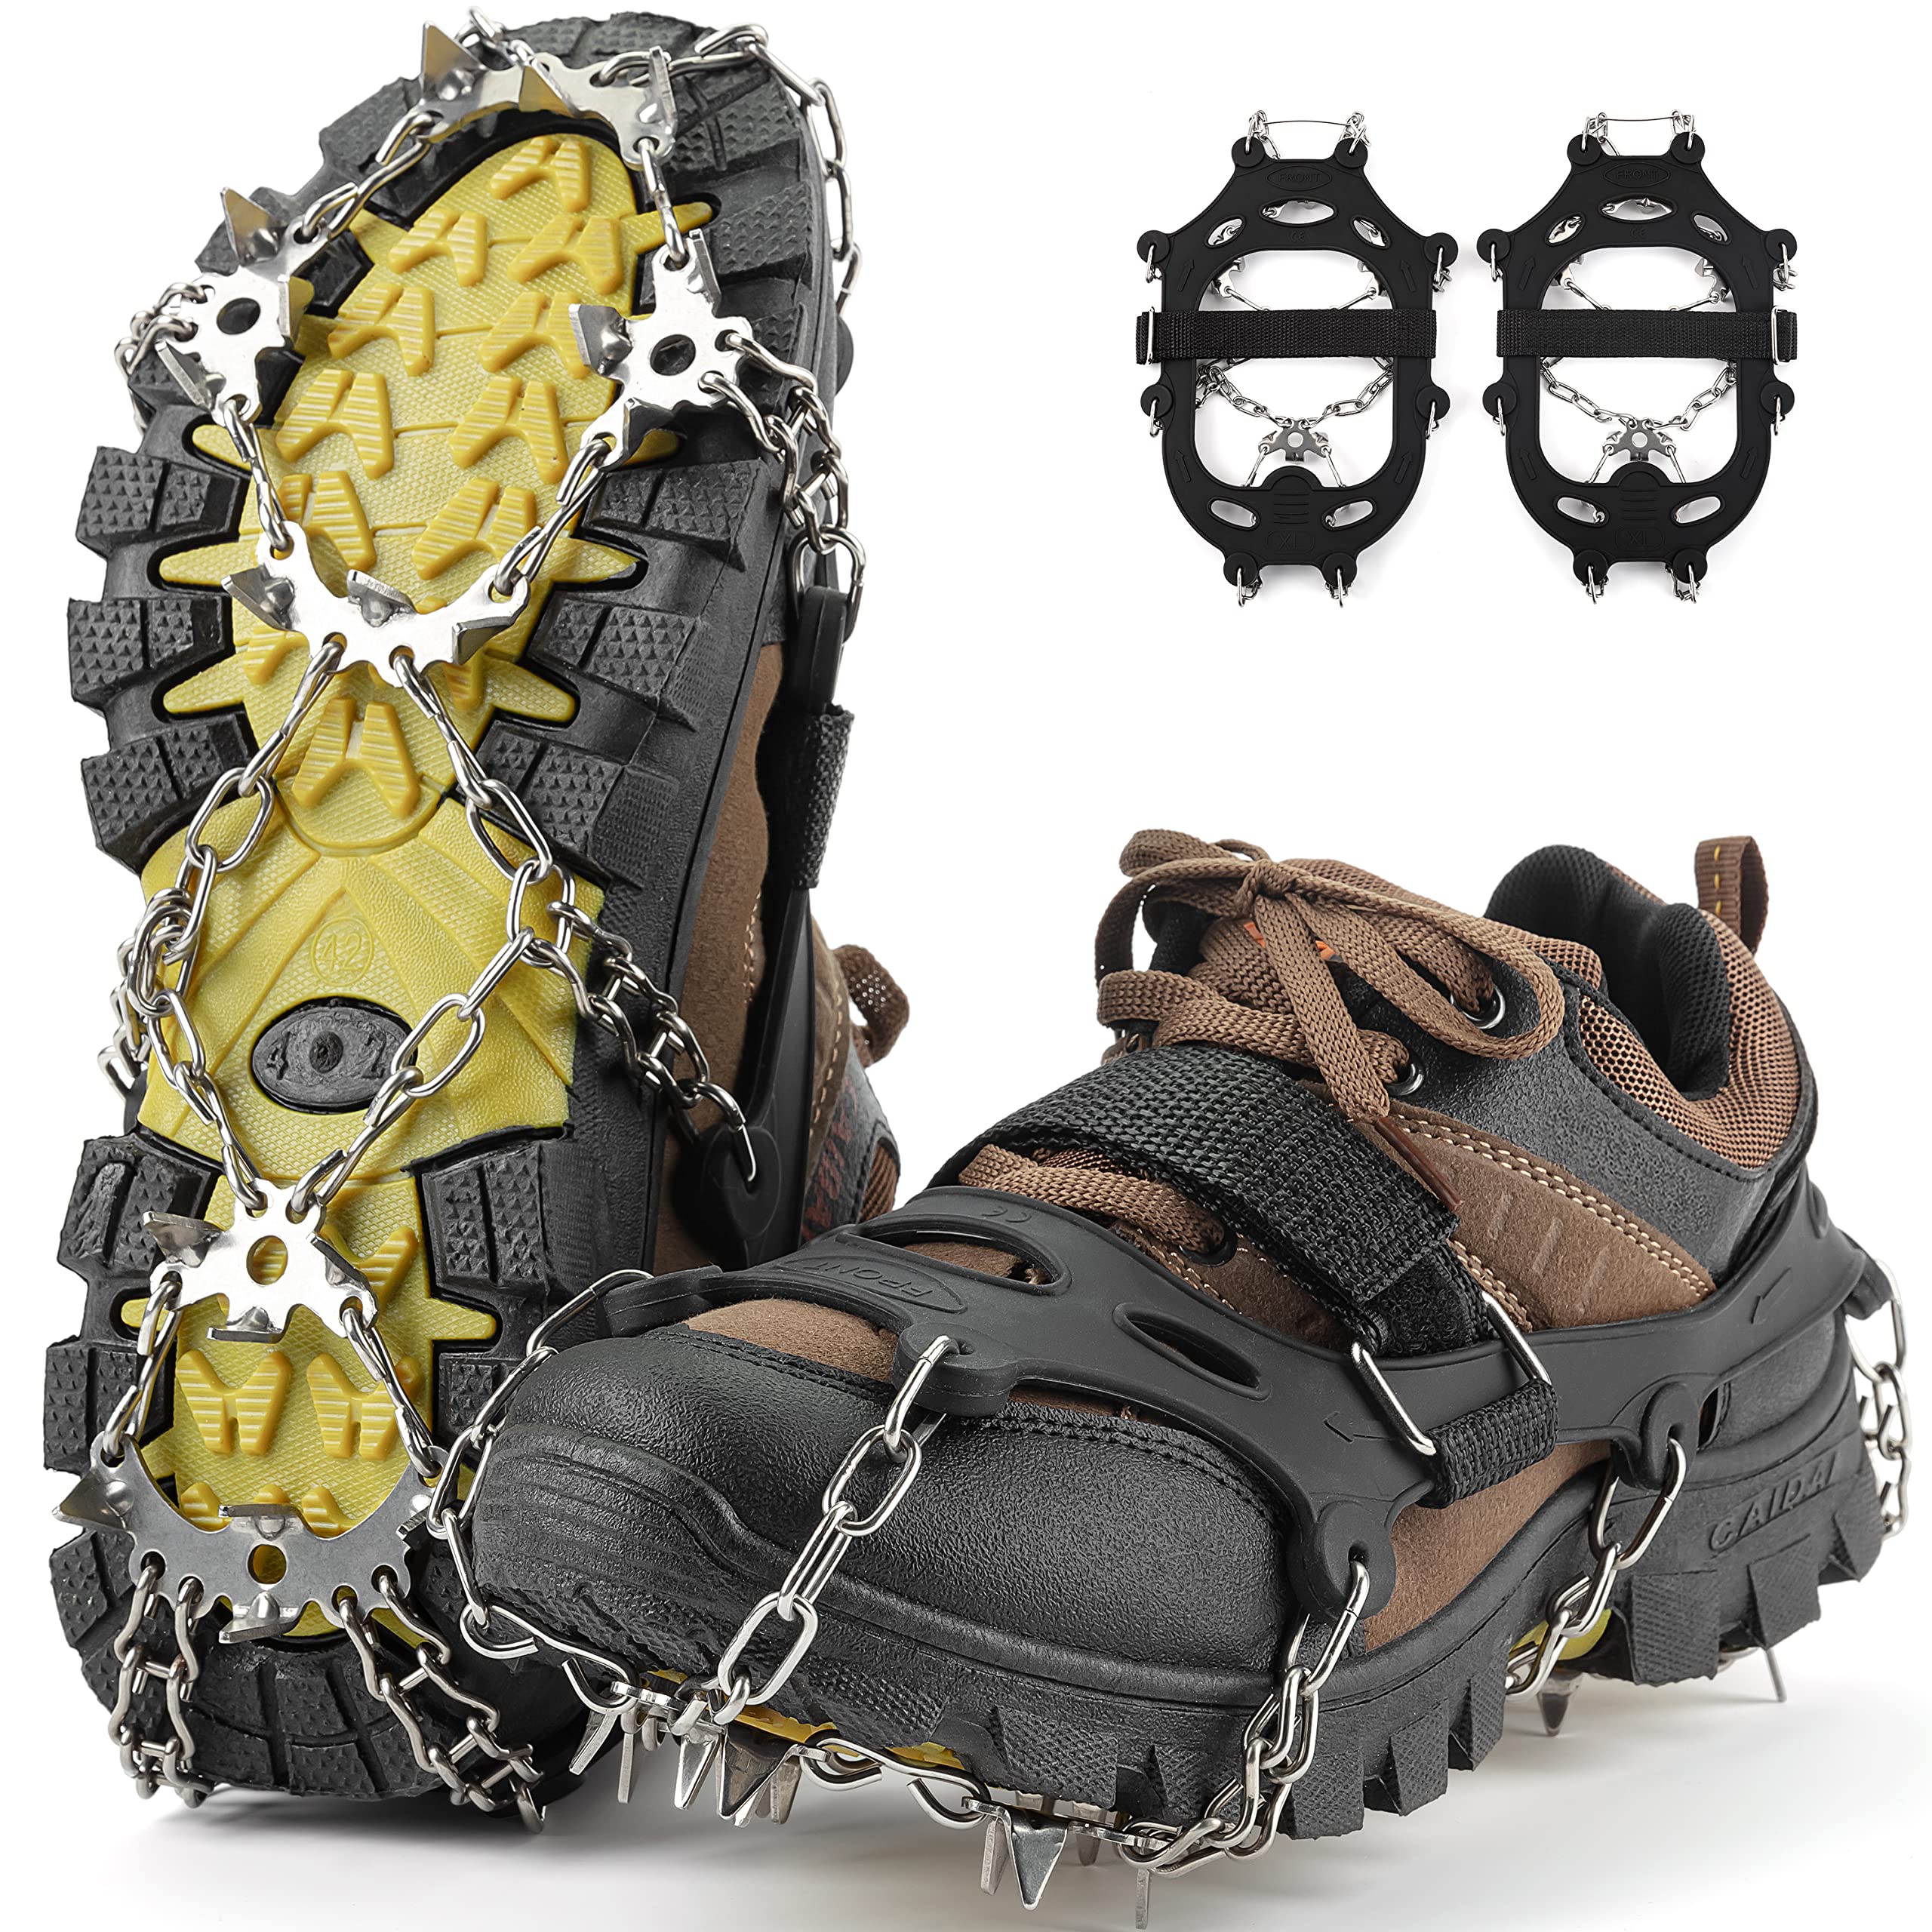 ROCKRAIN Ice Cleats Crampons Snow Traction 19 Stainless Steel Spikes for Winter  Walking Hiking Climbing Fishing